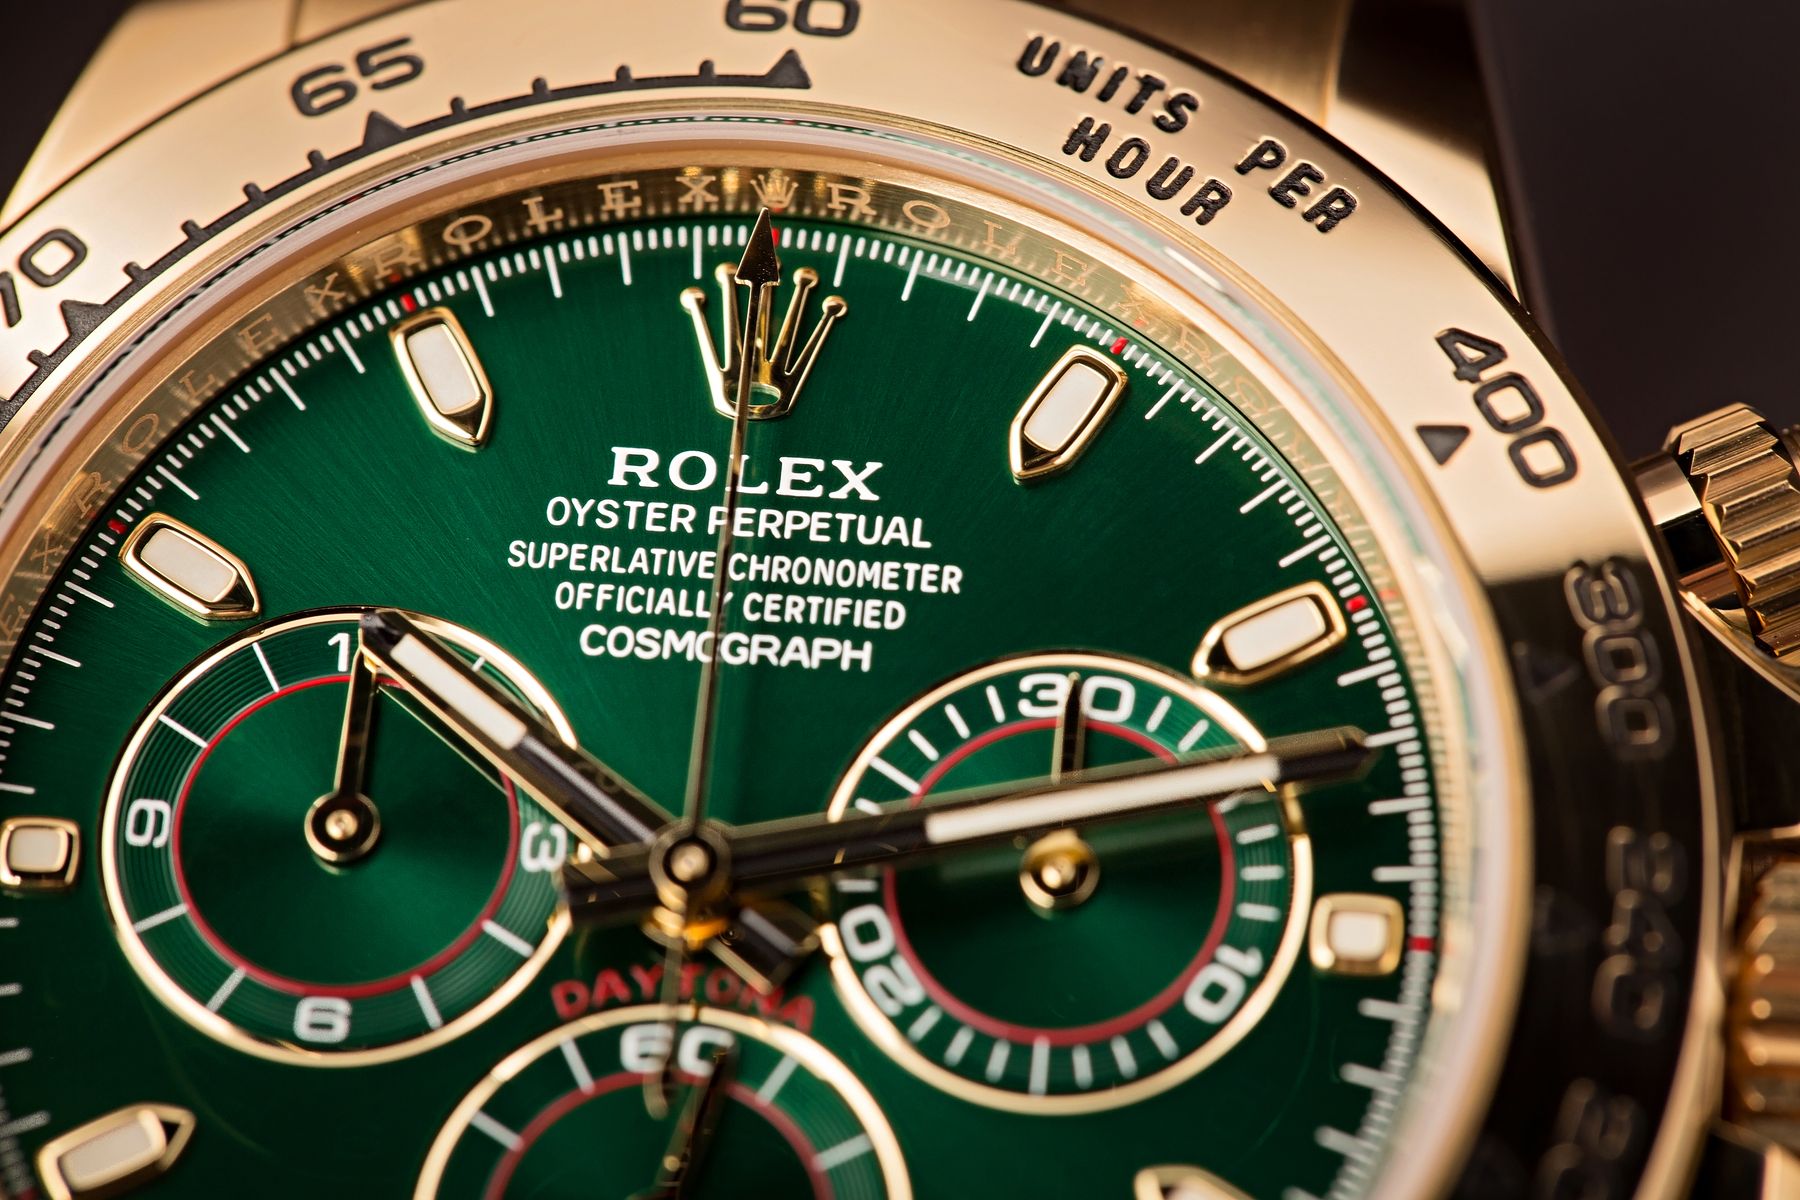 How to get on rolex waiting list